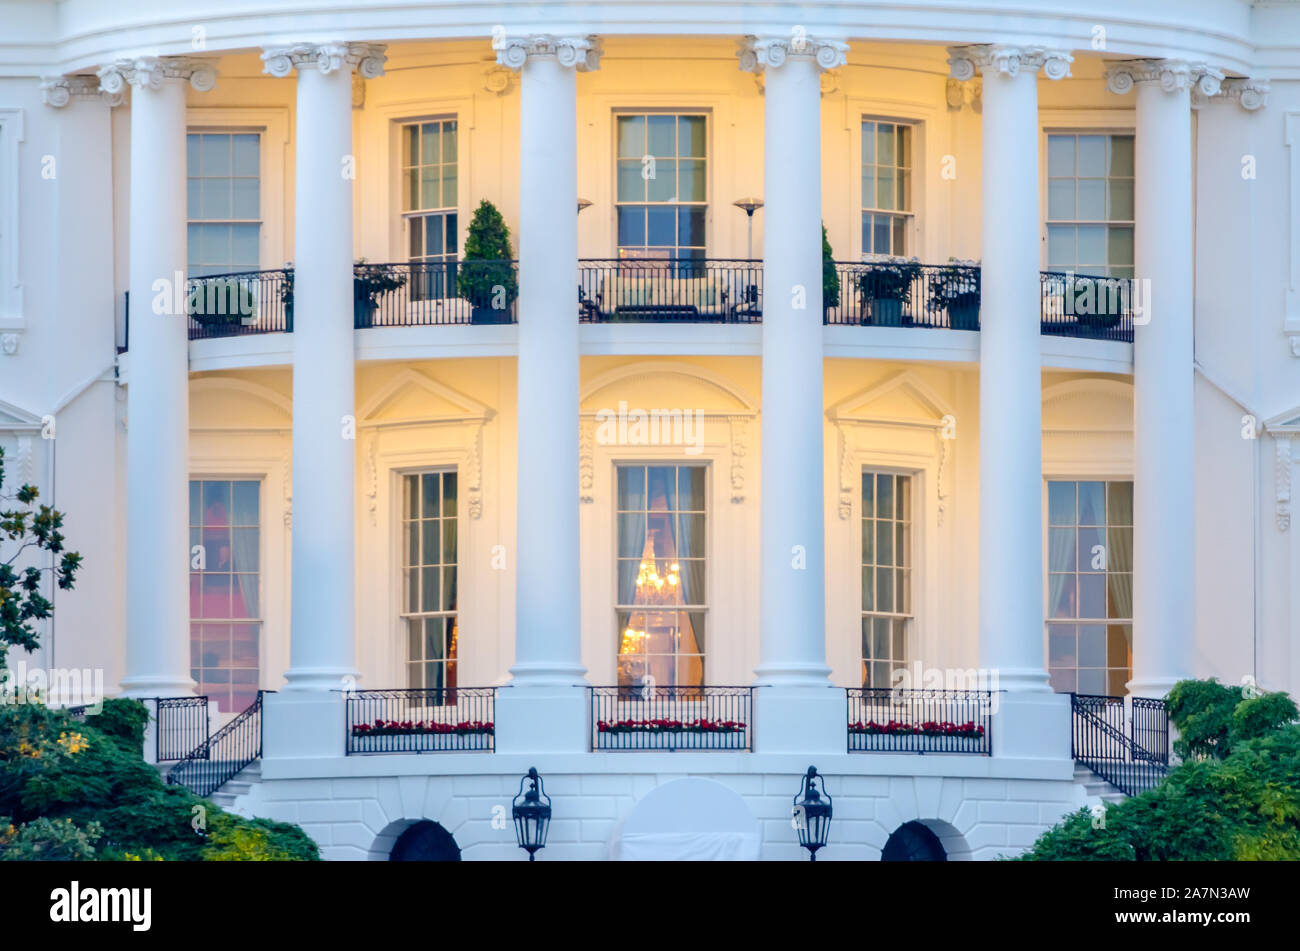 The White House In Washington Dc Executive Office Of The President Of The United States Stock Photo Alamy